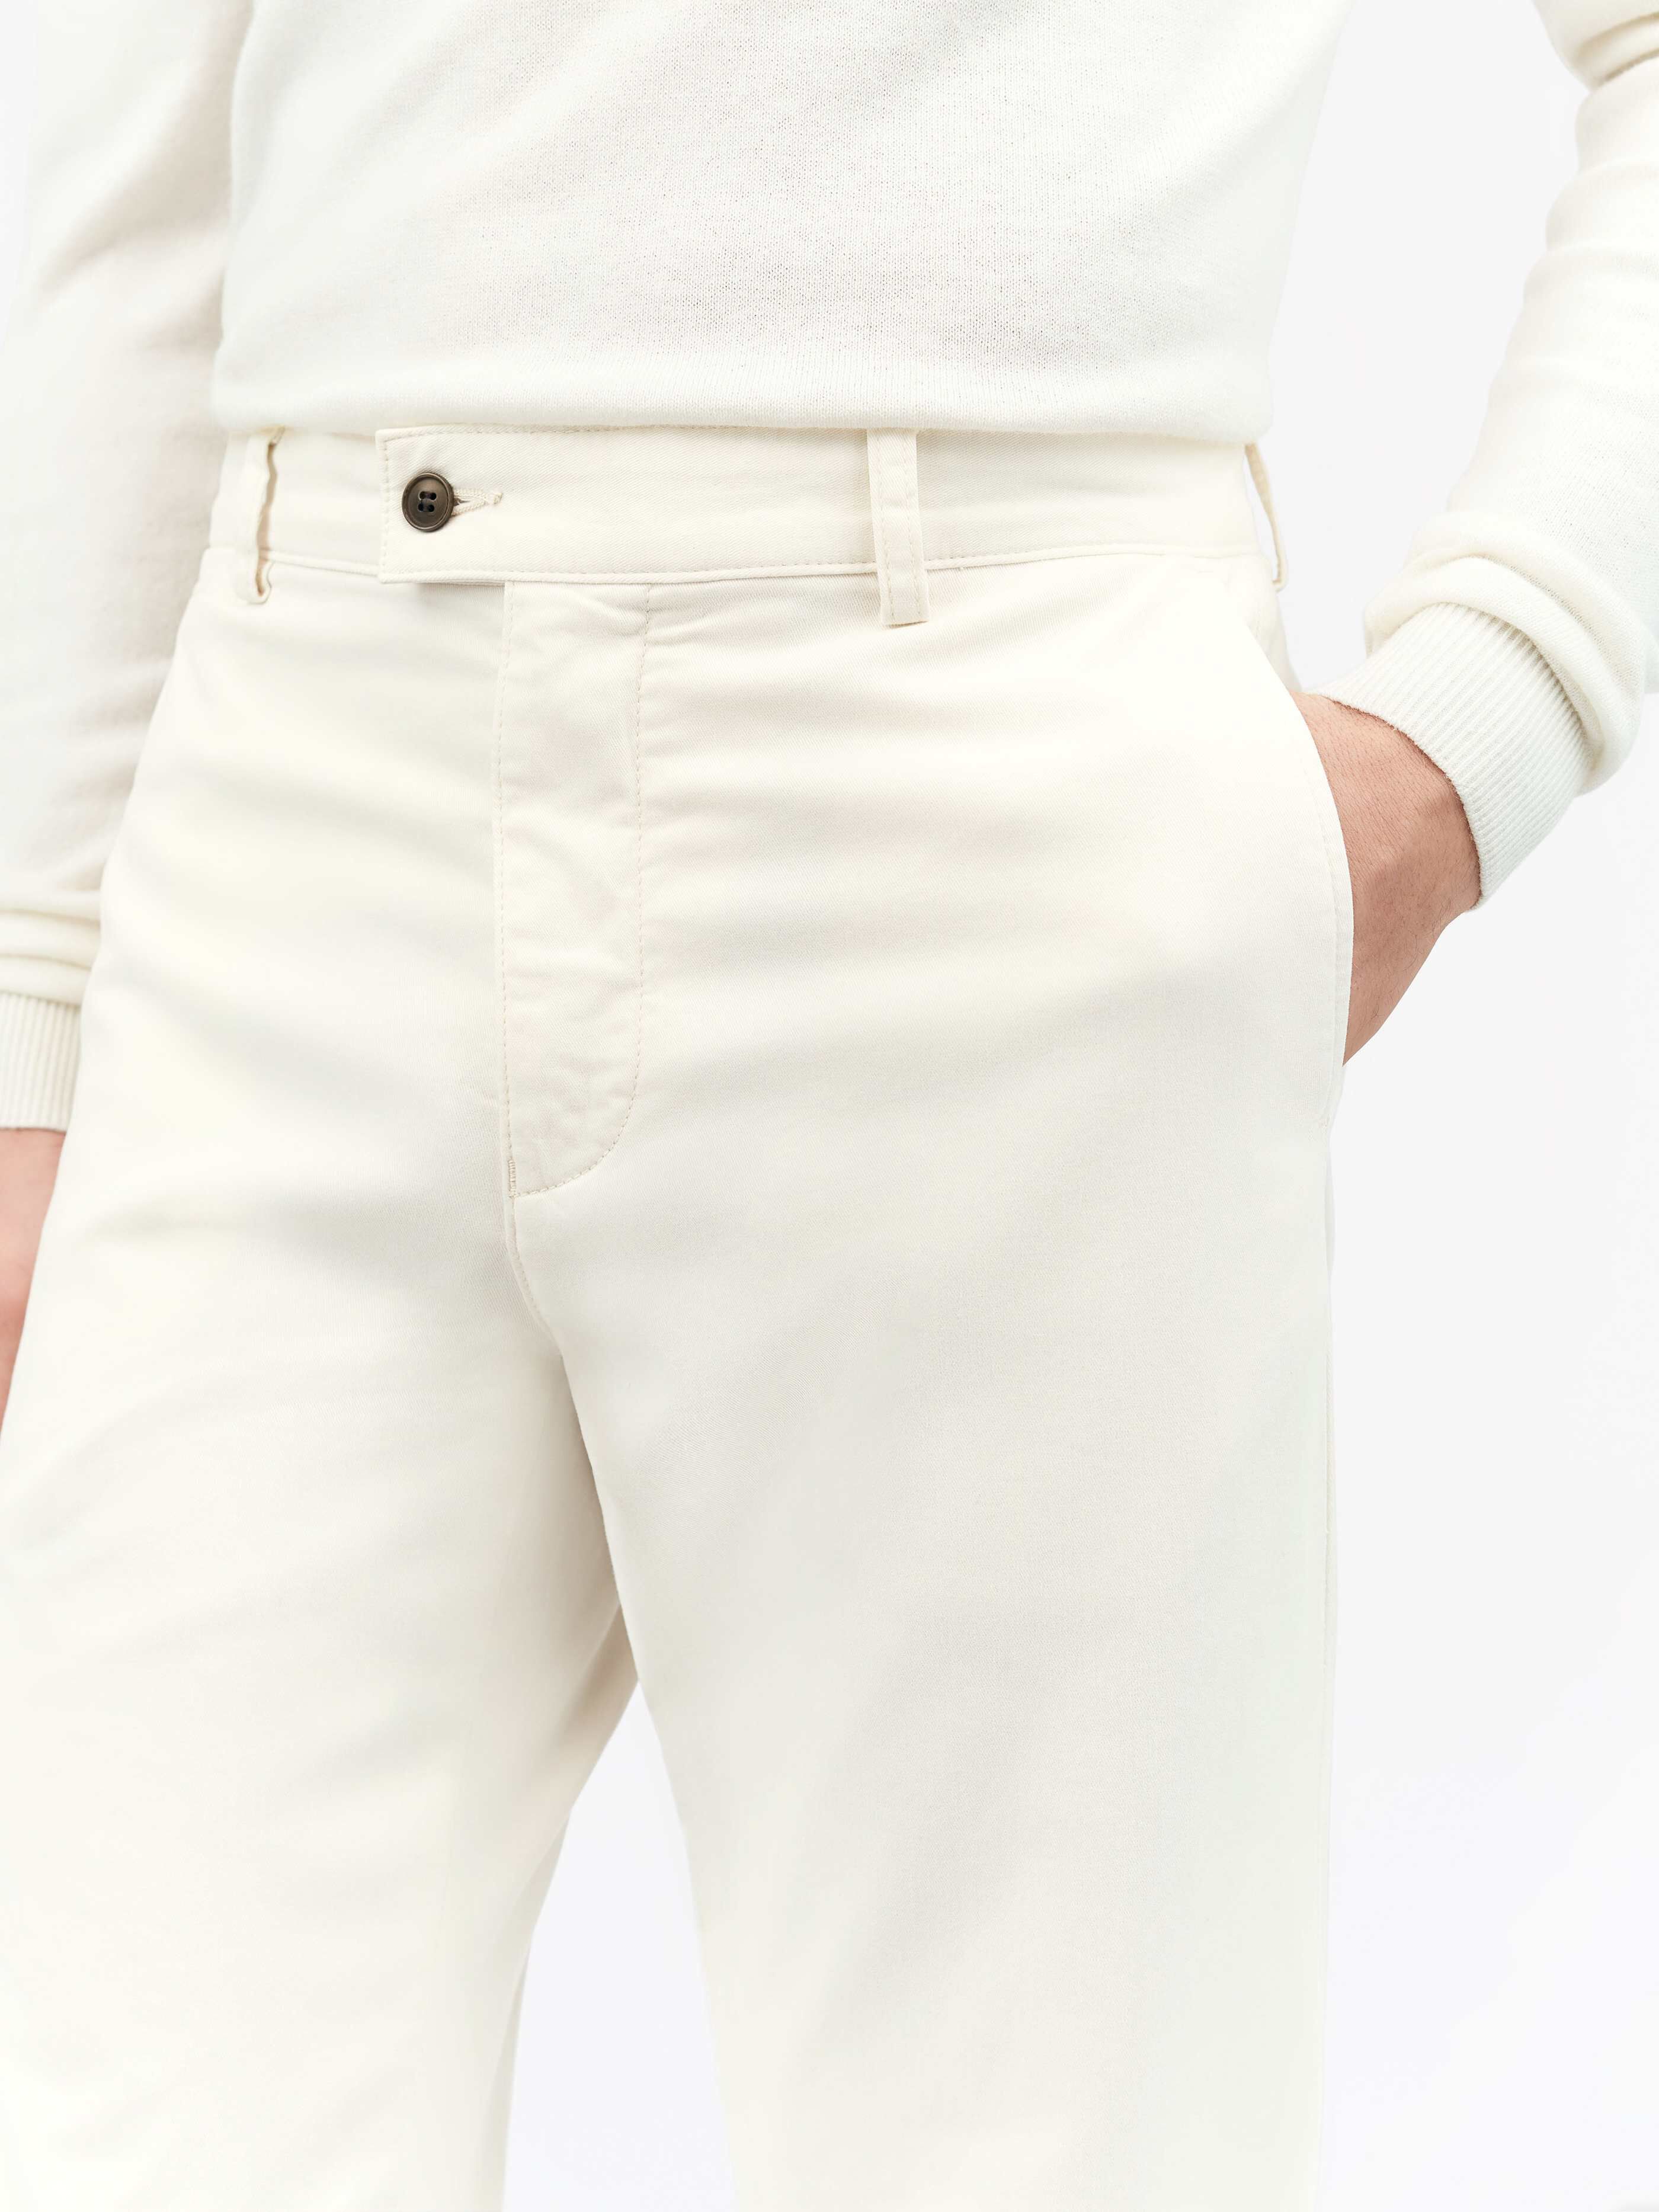 TIGER OF SWEDEN Caidon Pants in White T67555025 | Shop from eightywingold an official brand partner for Tiger of Sweden Canada and US.